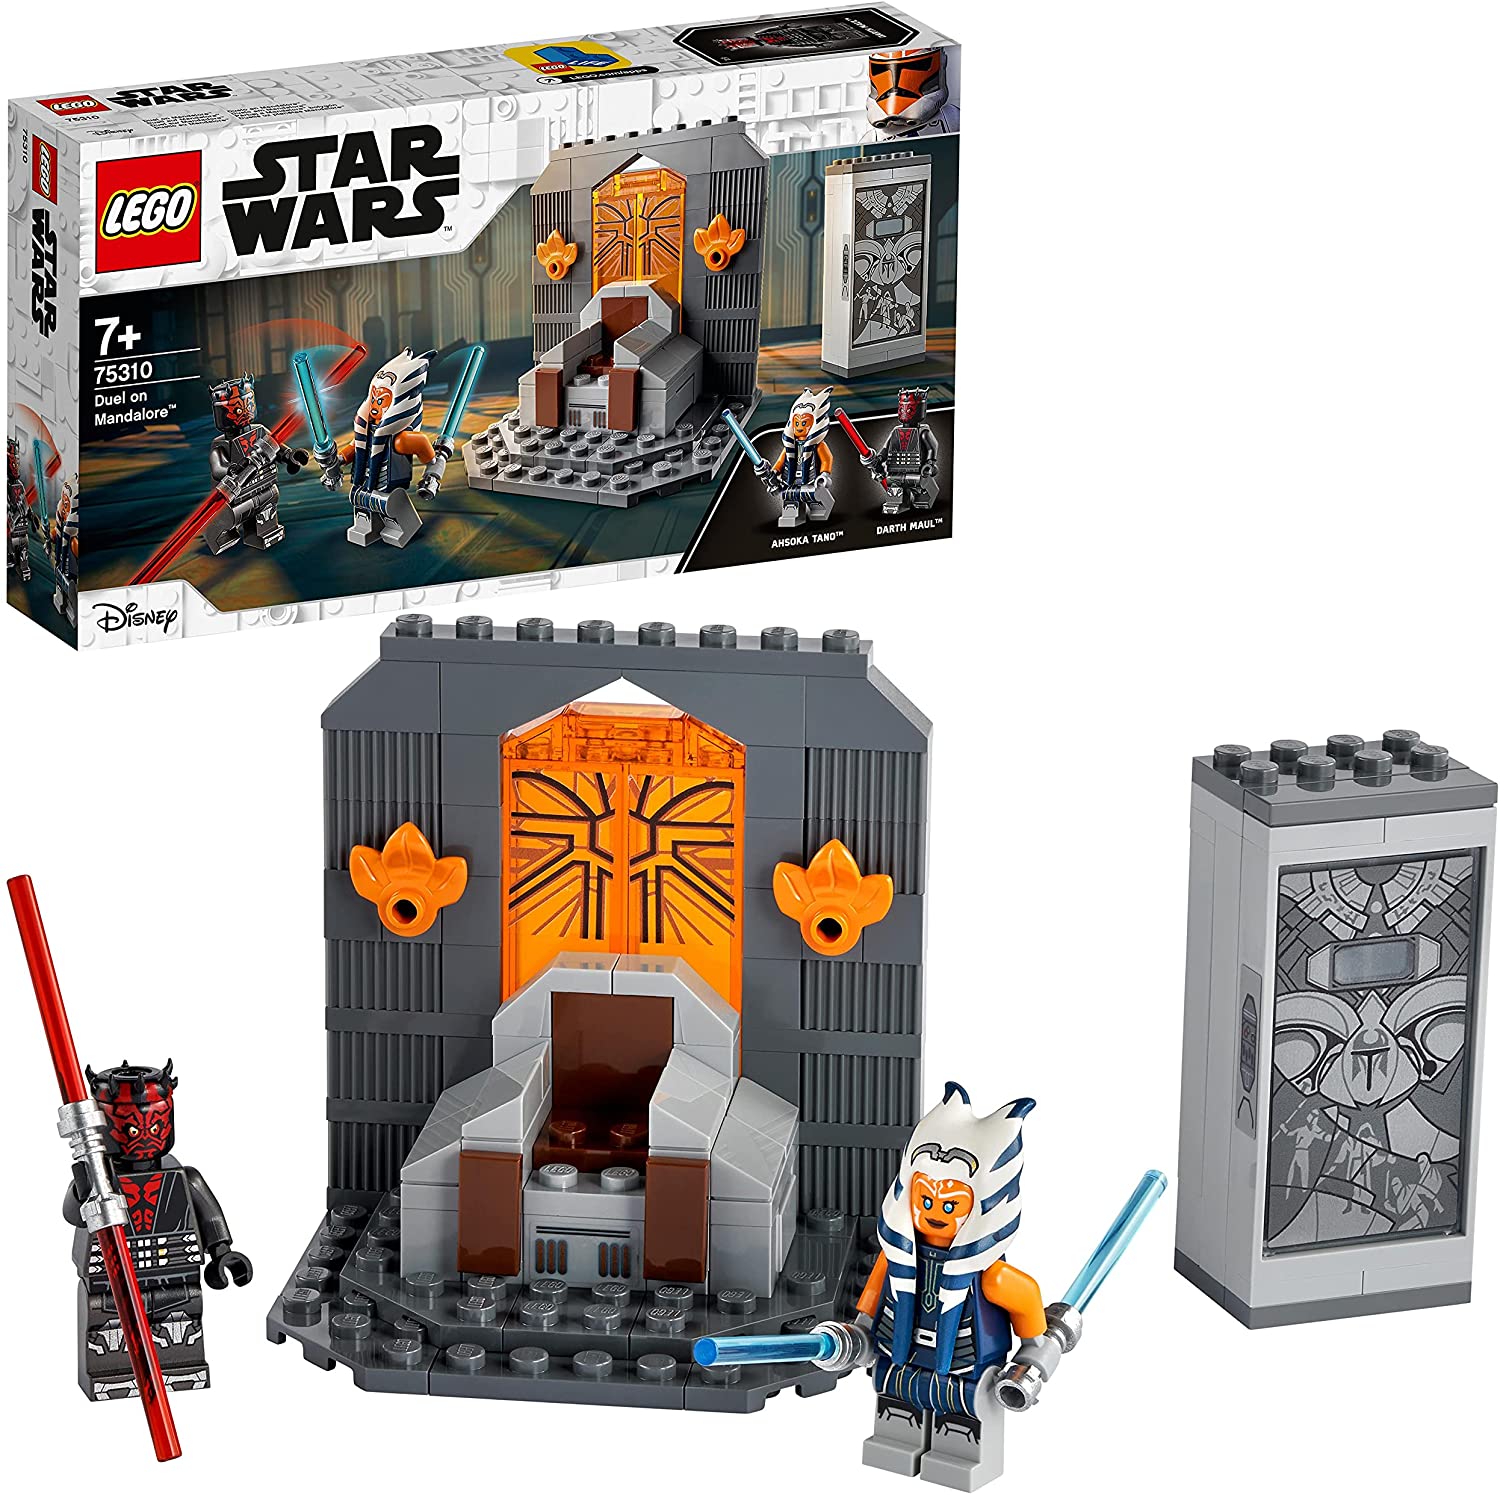 LEGO 75310 Star Wars Duel on Mandalore™, Construction Set for Boys and Girl